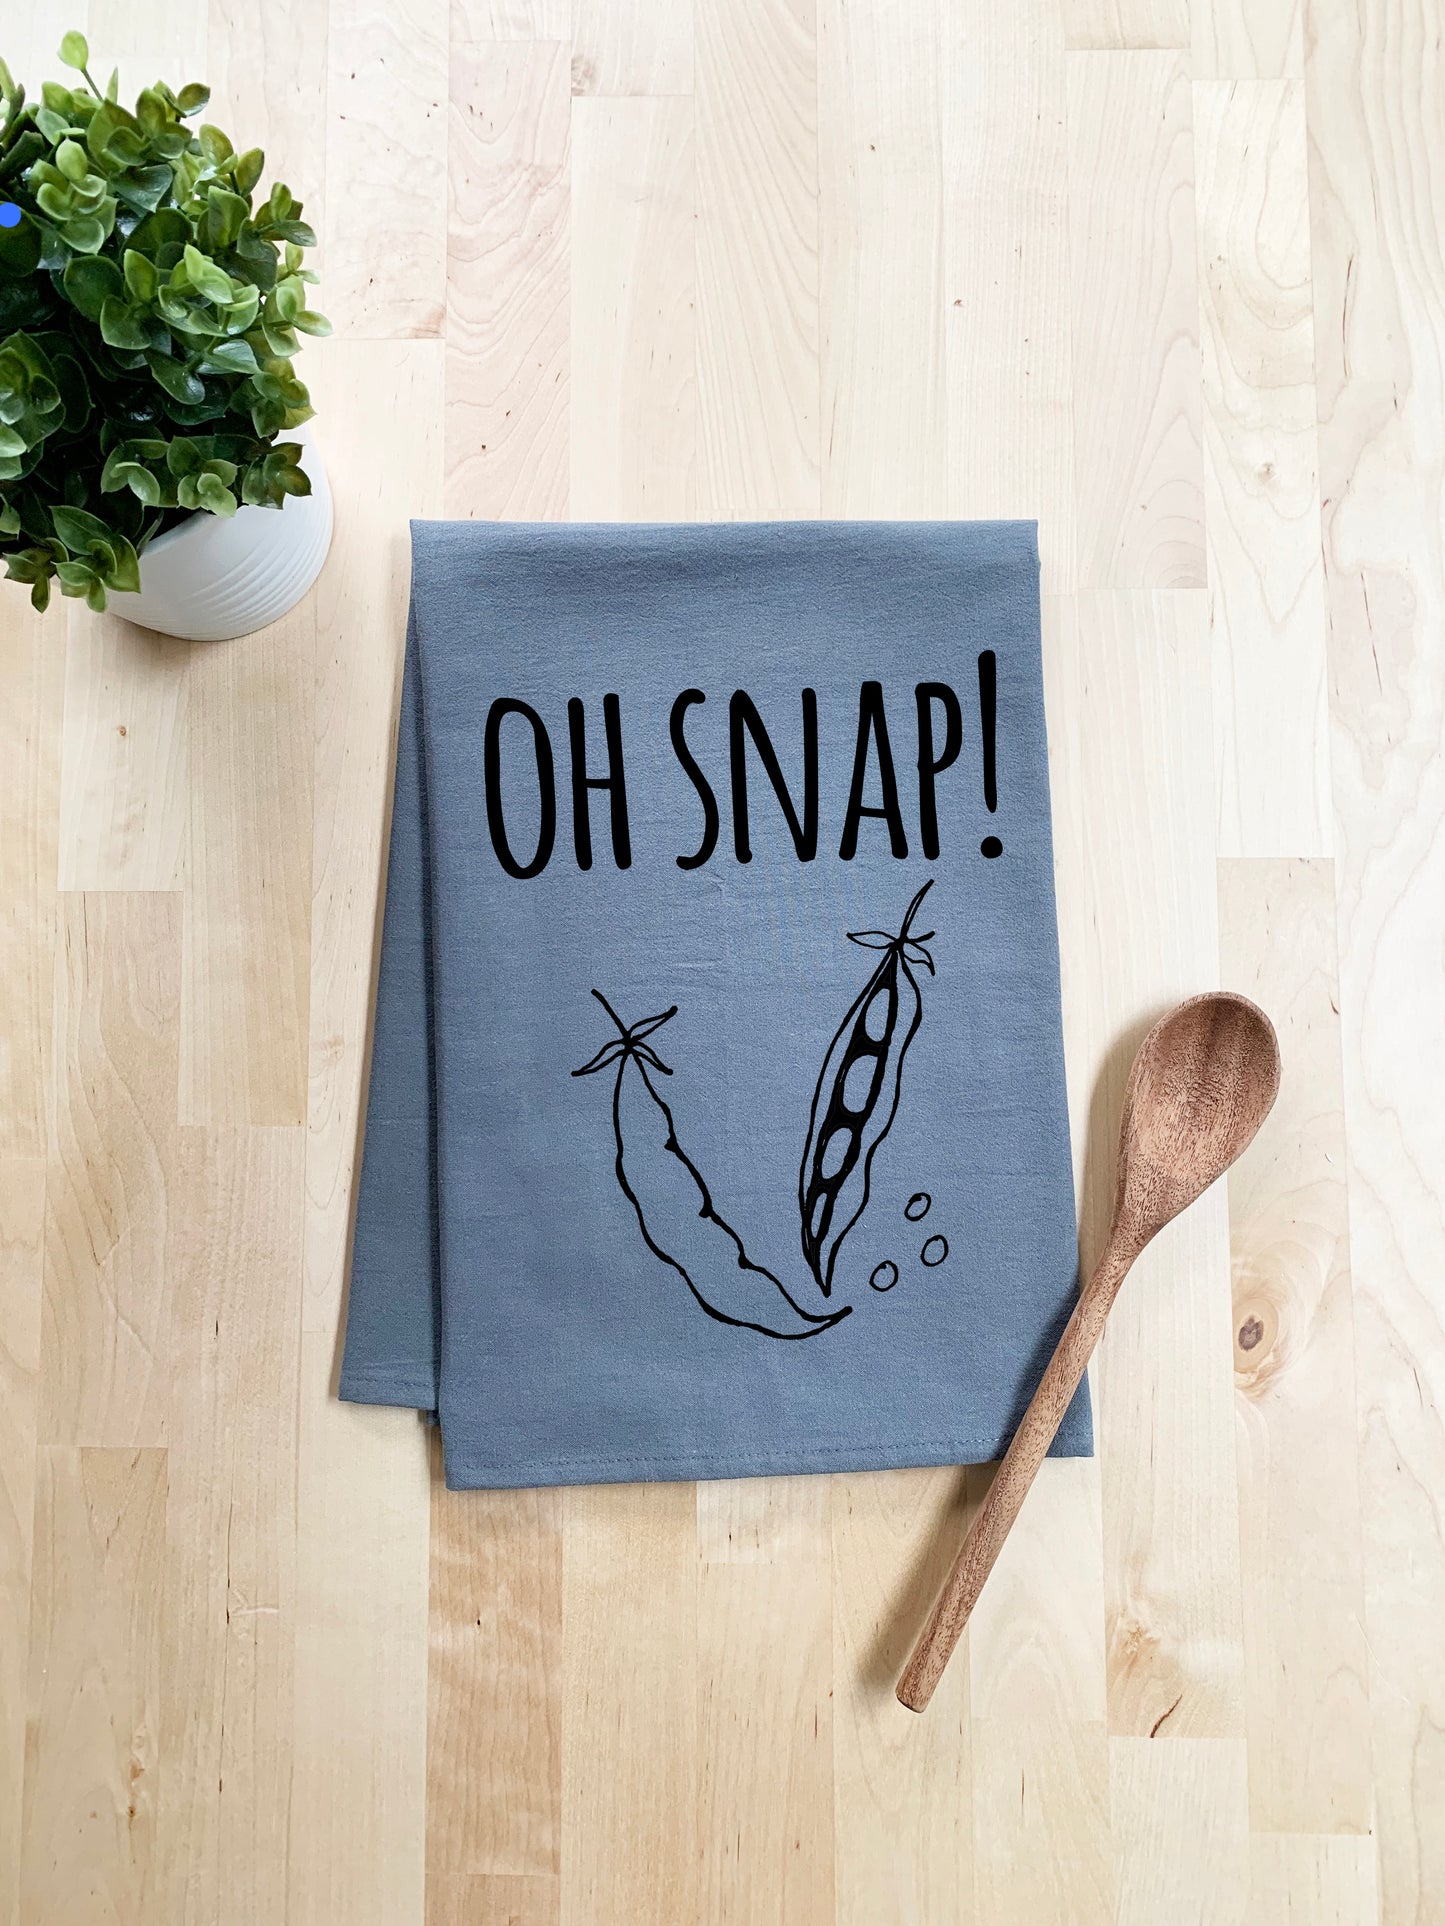 Oh Snap! (Peas) Dish Towel - White Or Gray - MoonlightMakers